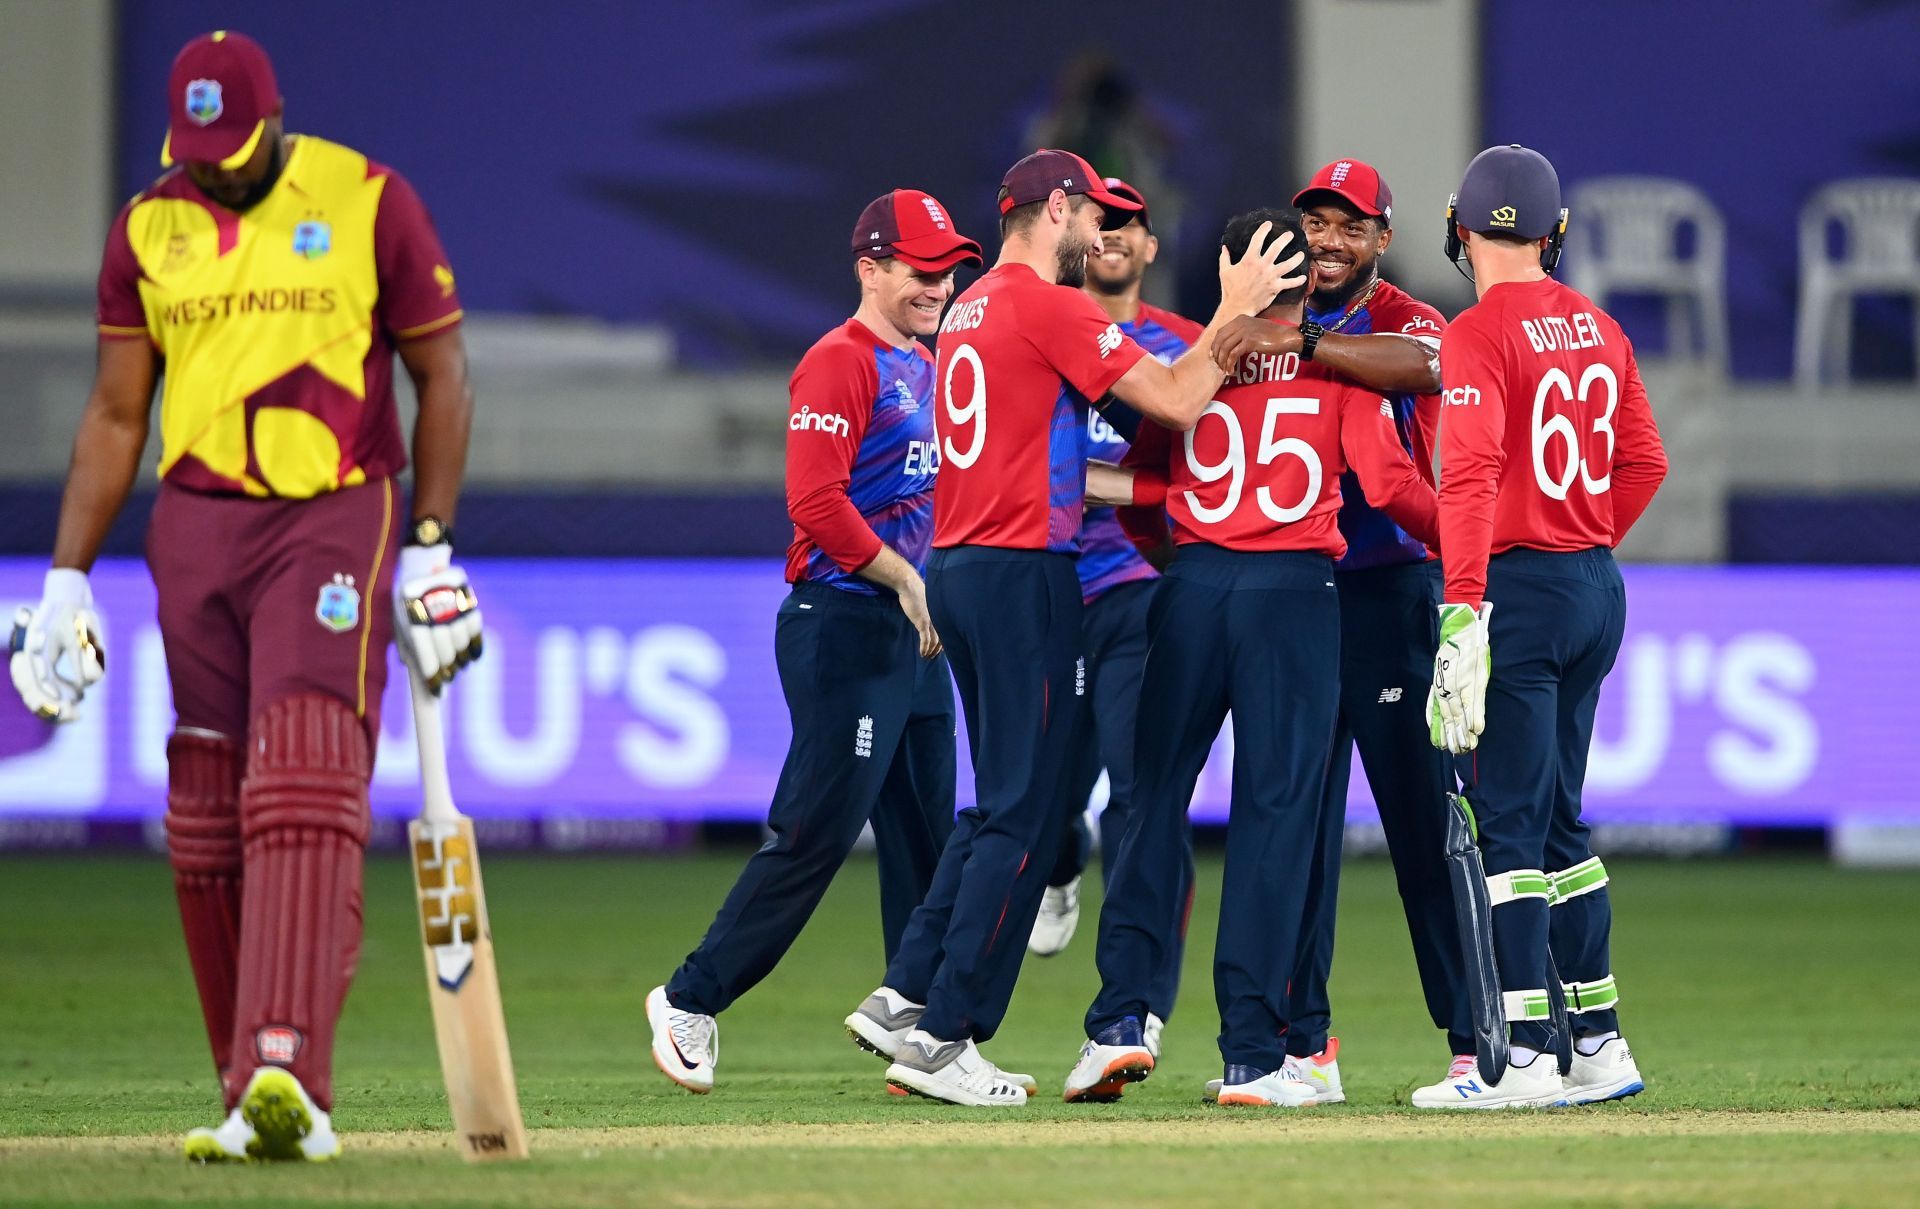 England got off to a flier in the T20 World Cup 2021, while the defending champions look for solutions.